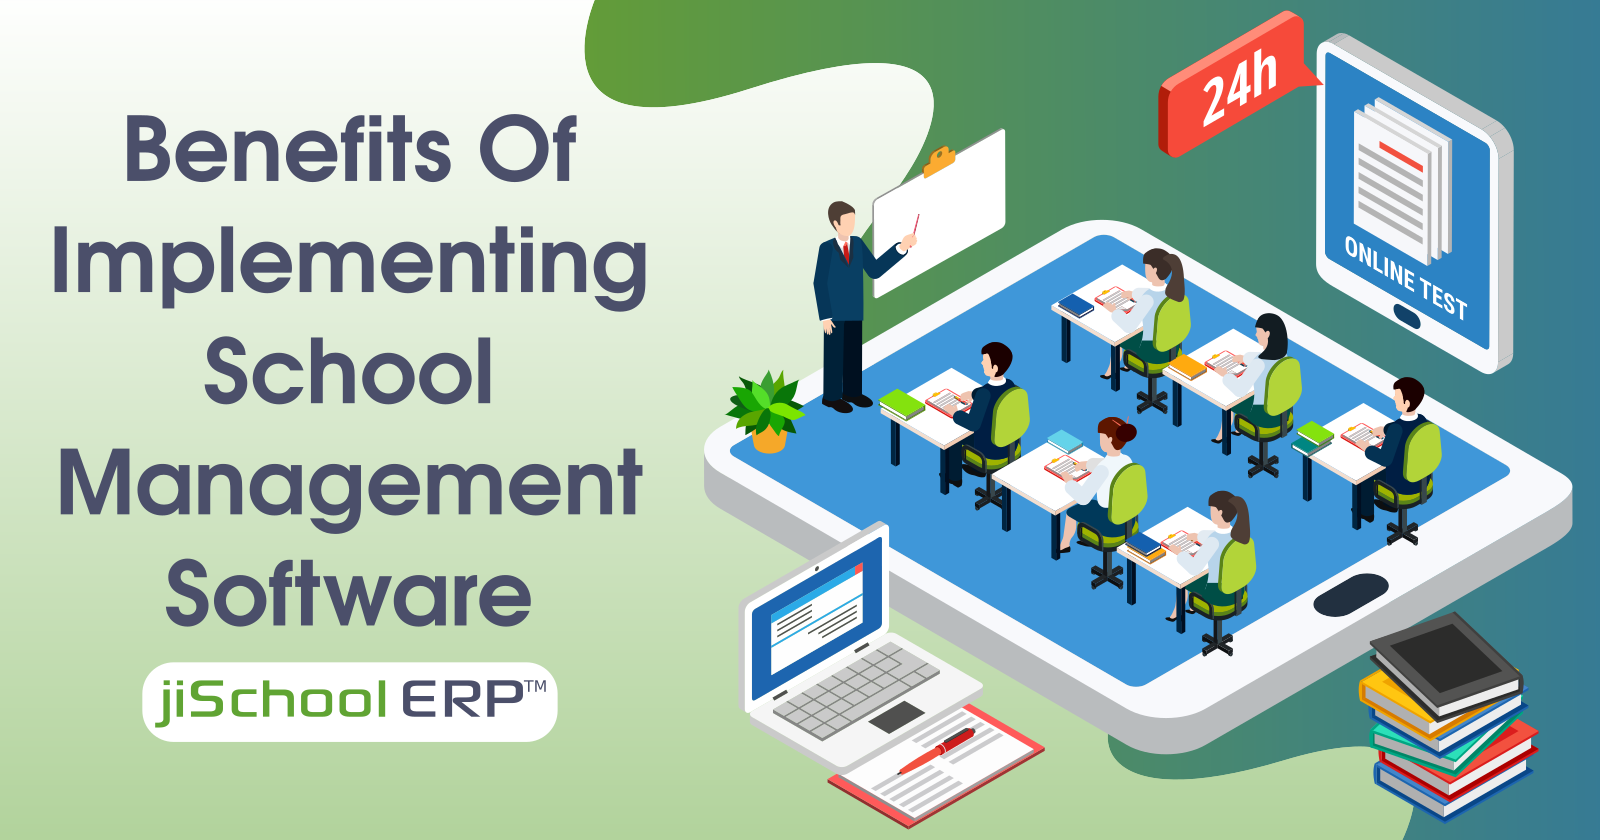 Benefits of Implementing School Management Software